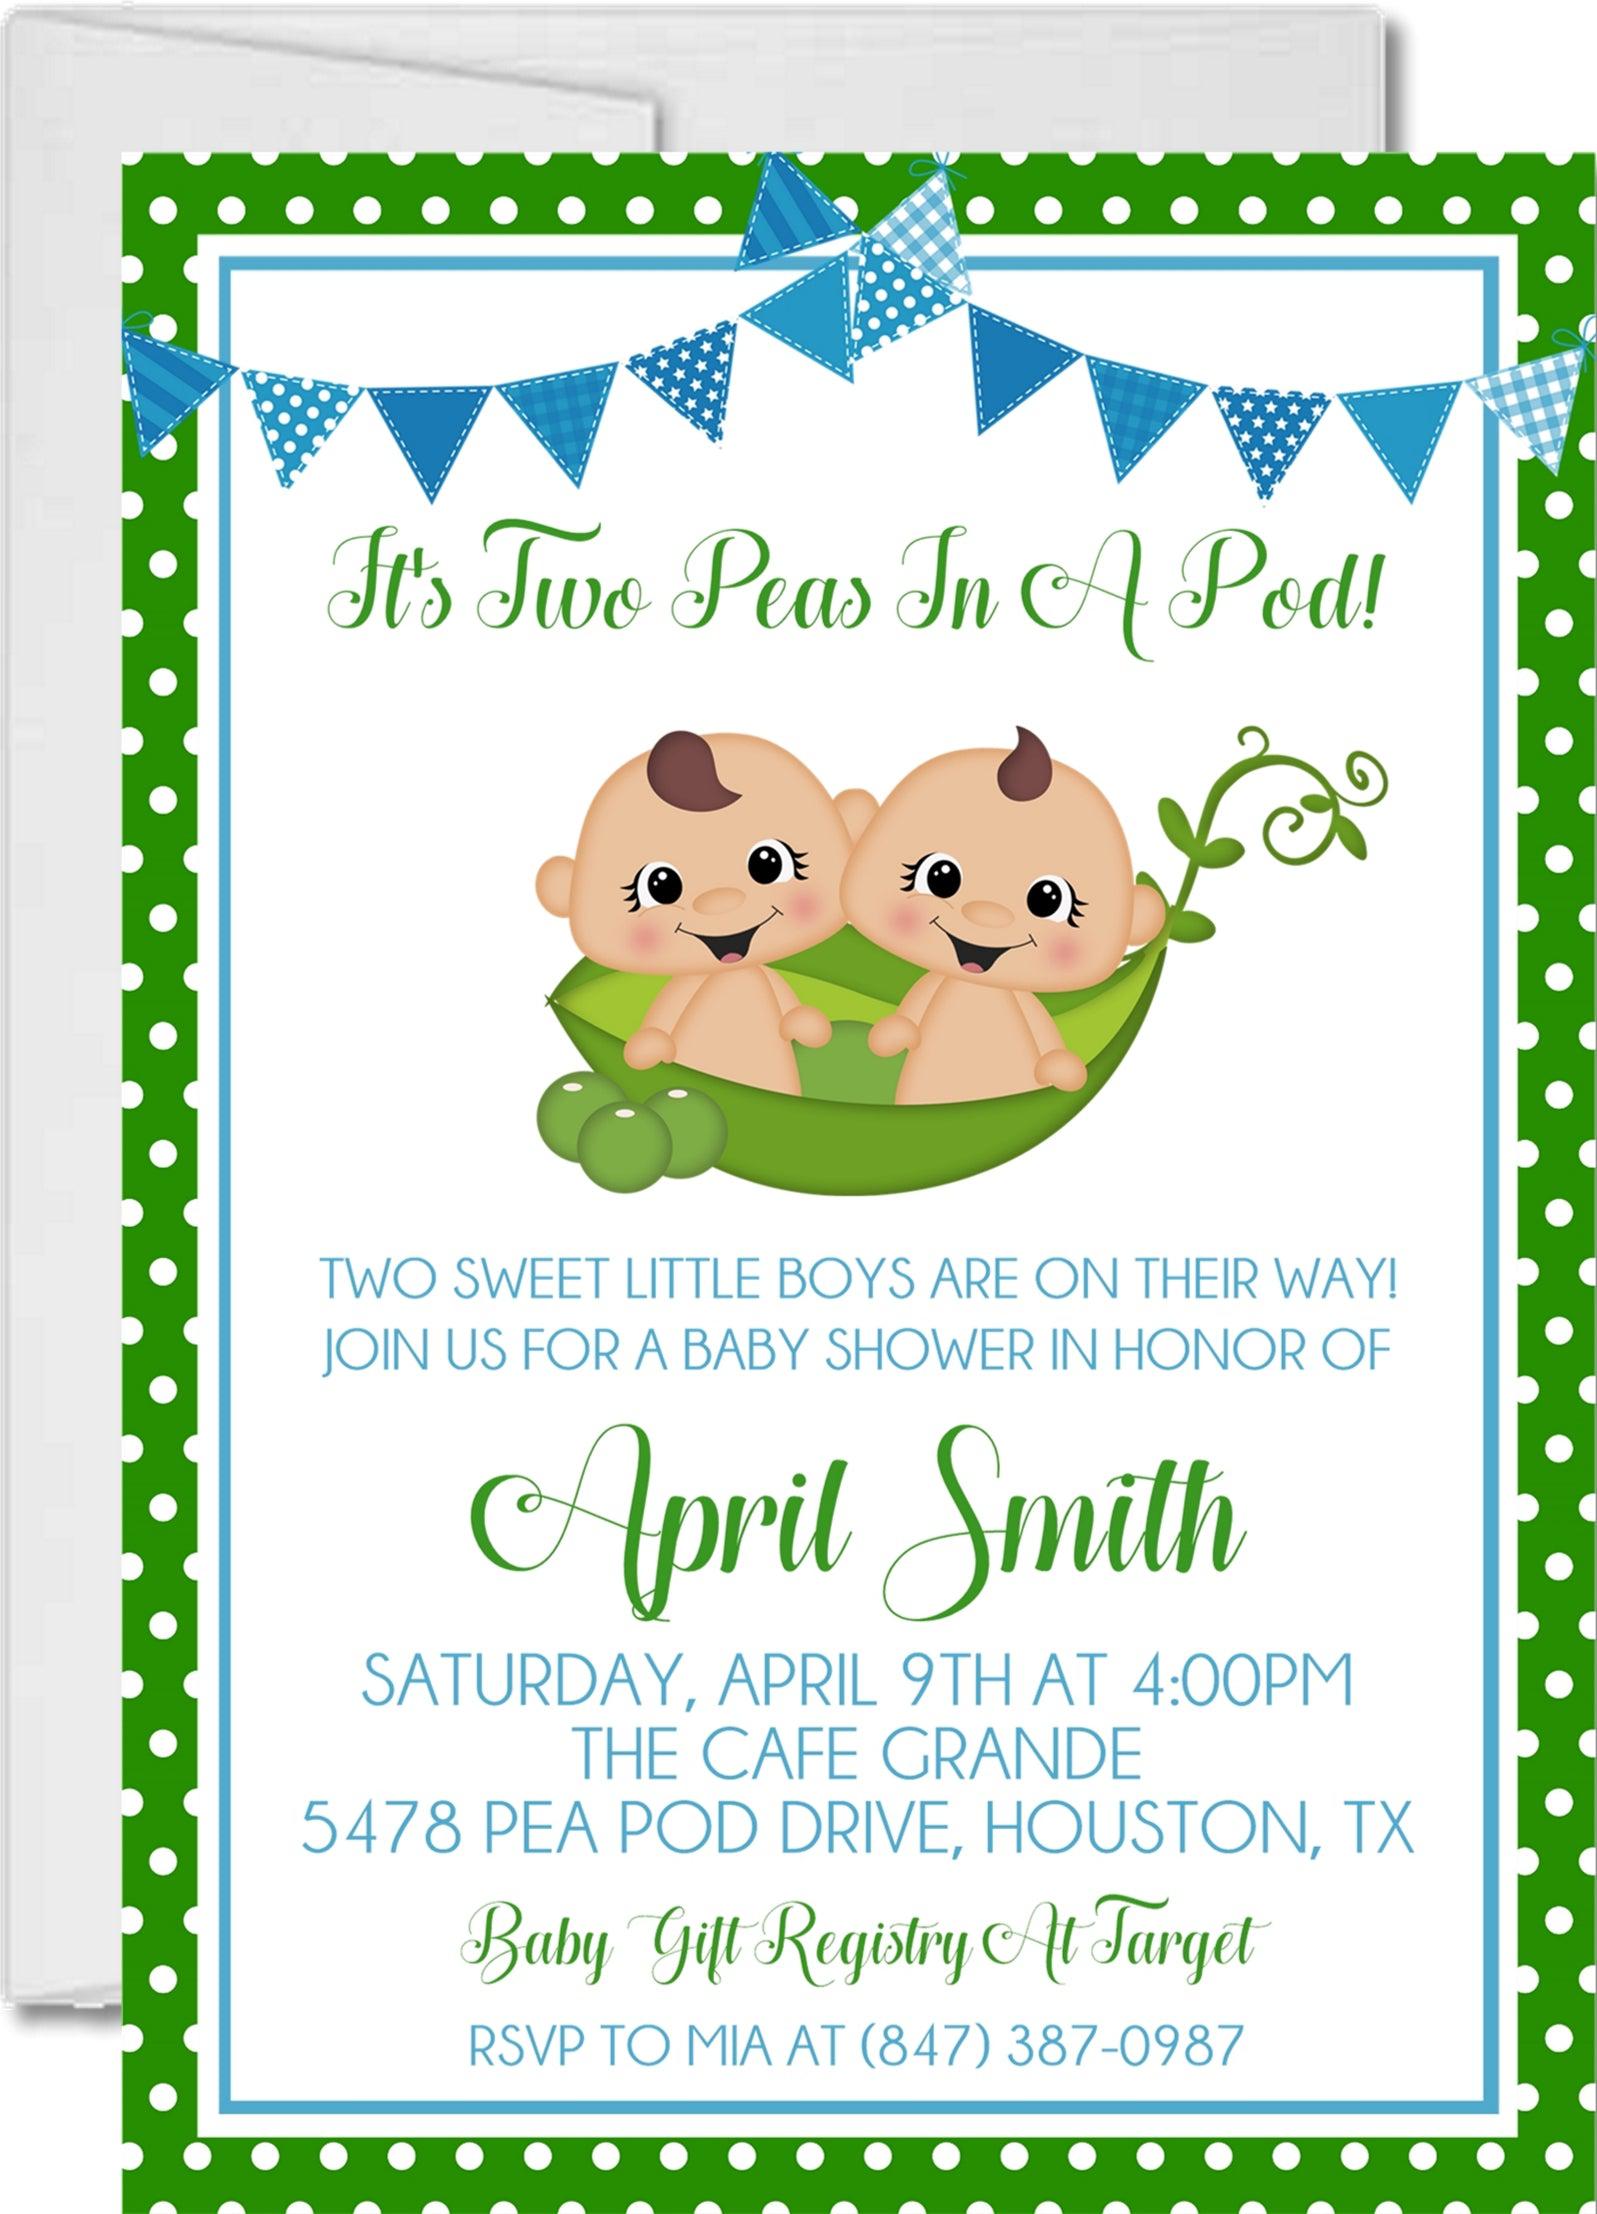 Twins Two Peas In A Pod Baby Shower Invitations